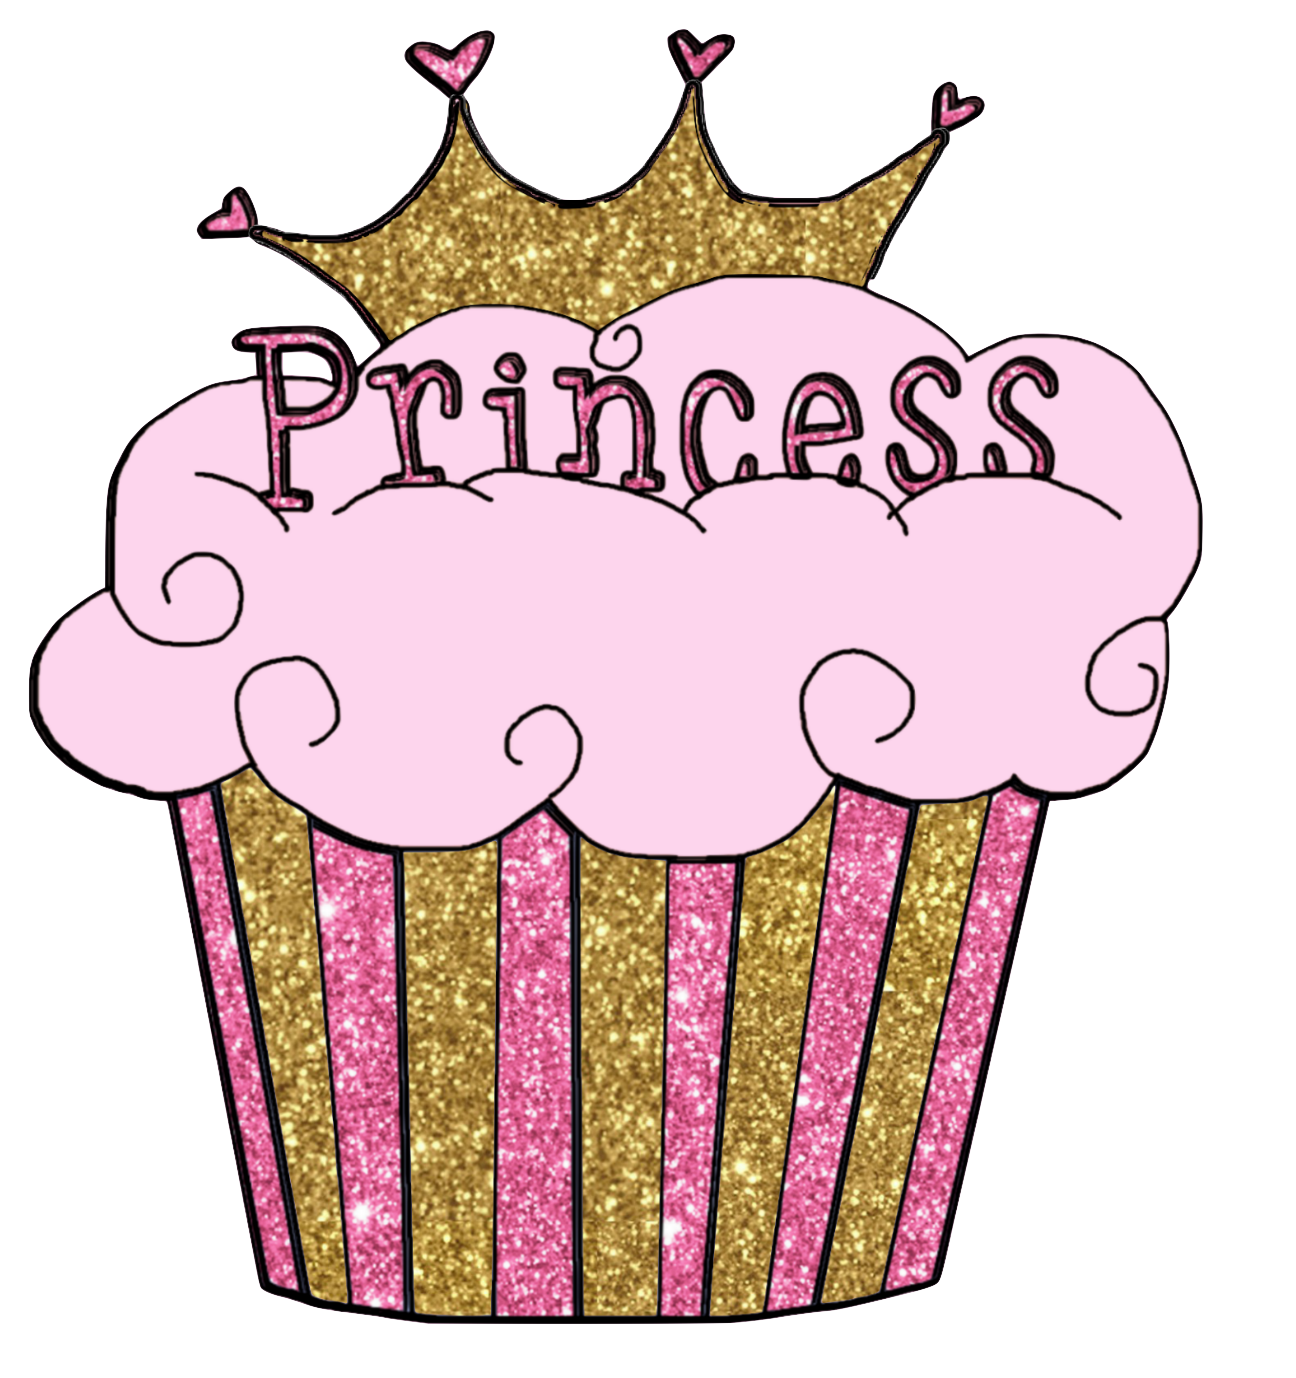 Beautiful Princess Party Cupcake for Tea Parties - Signs - Invitations Create a Party!